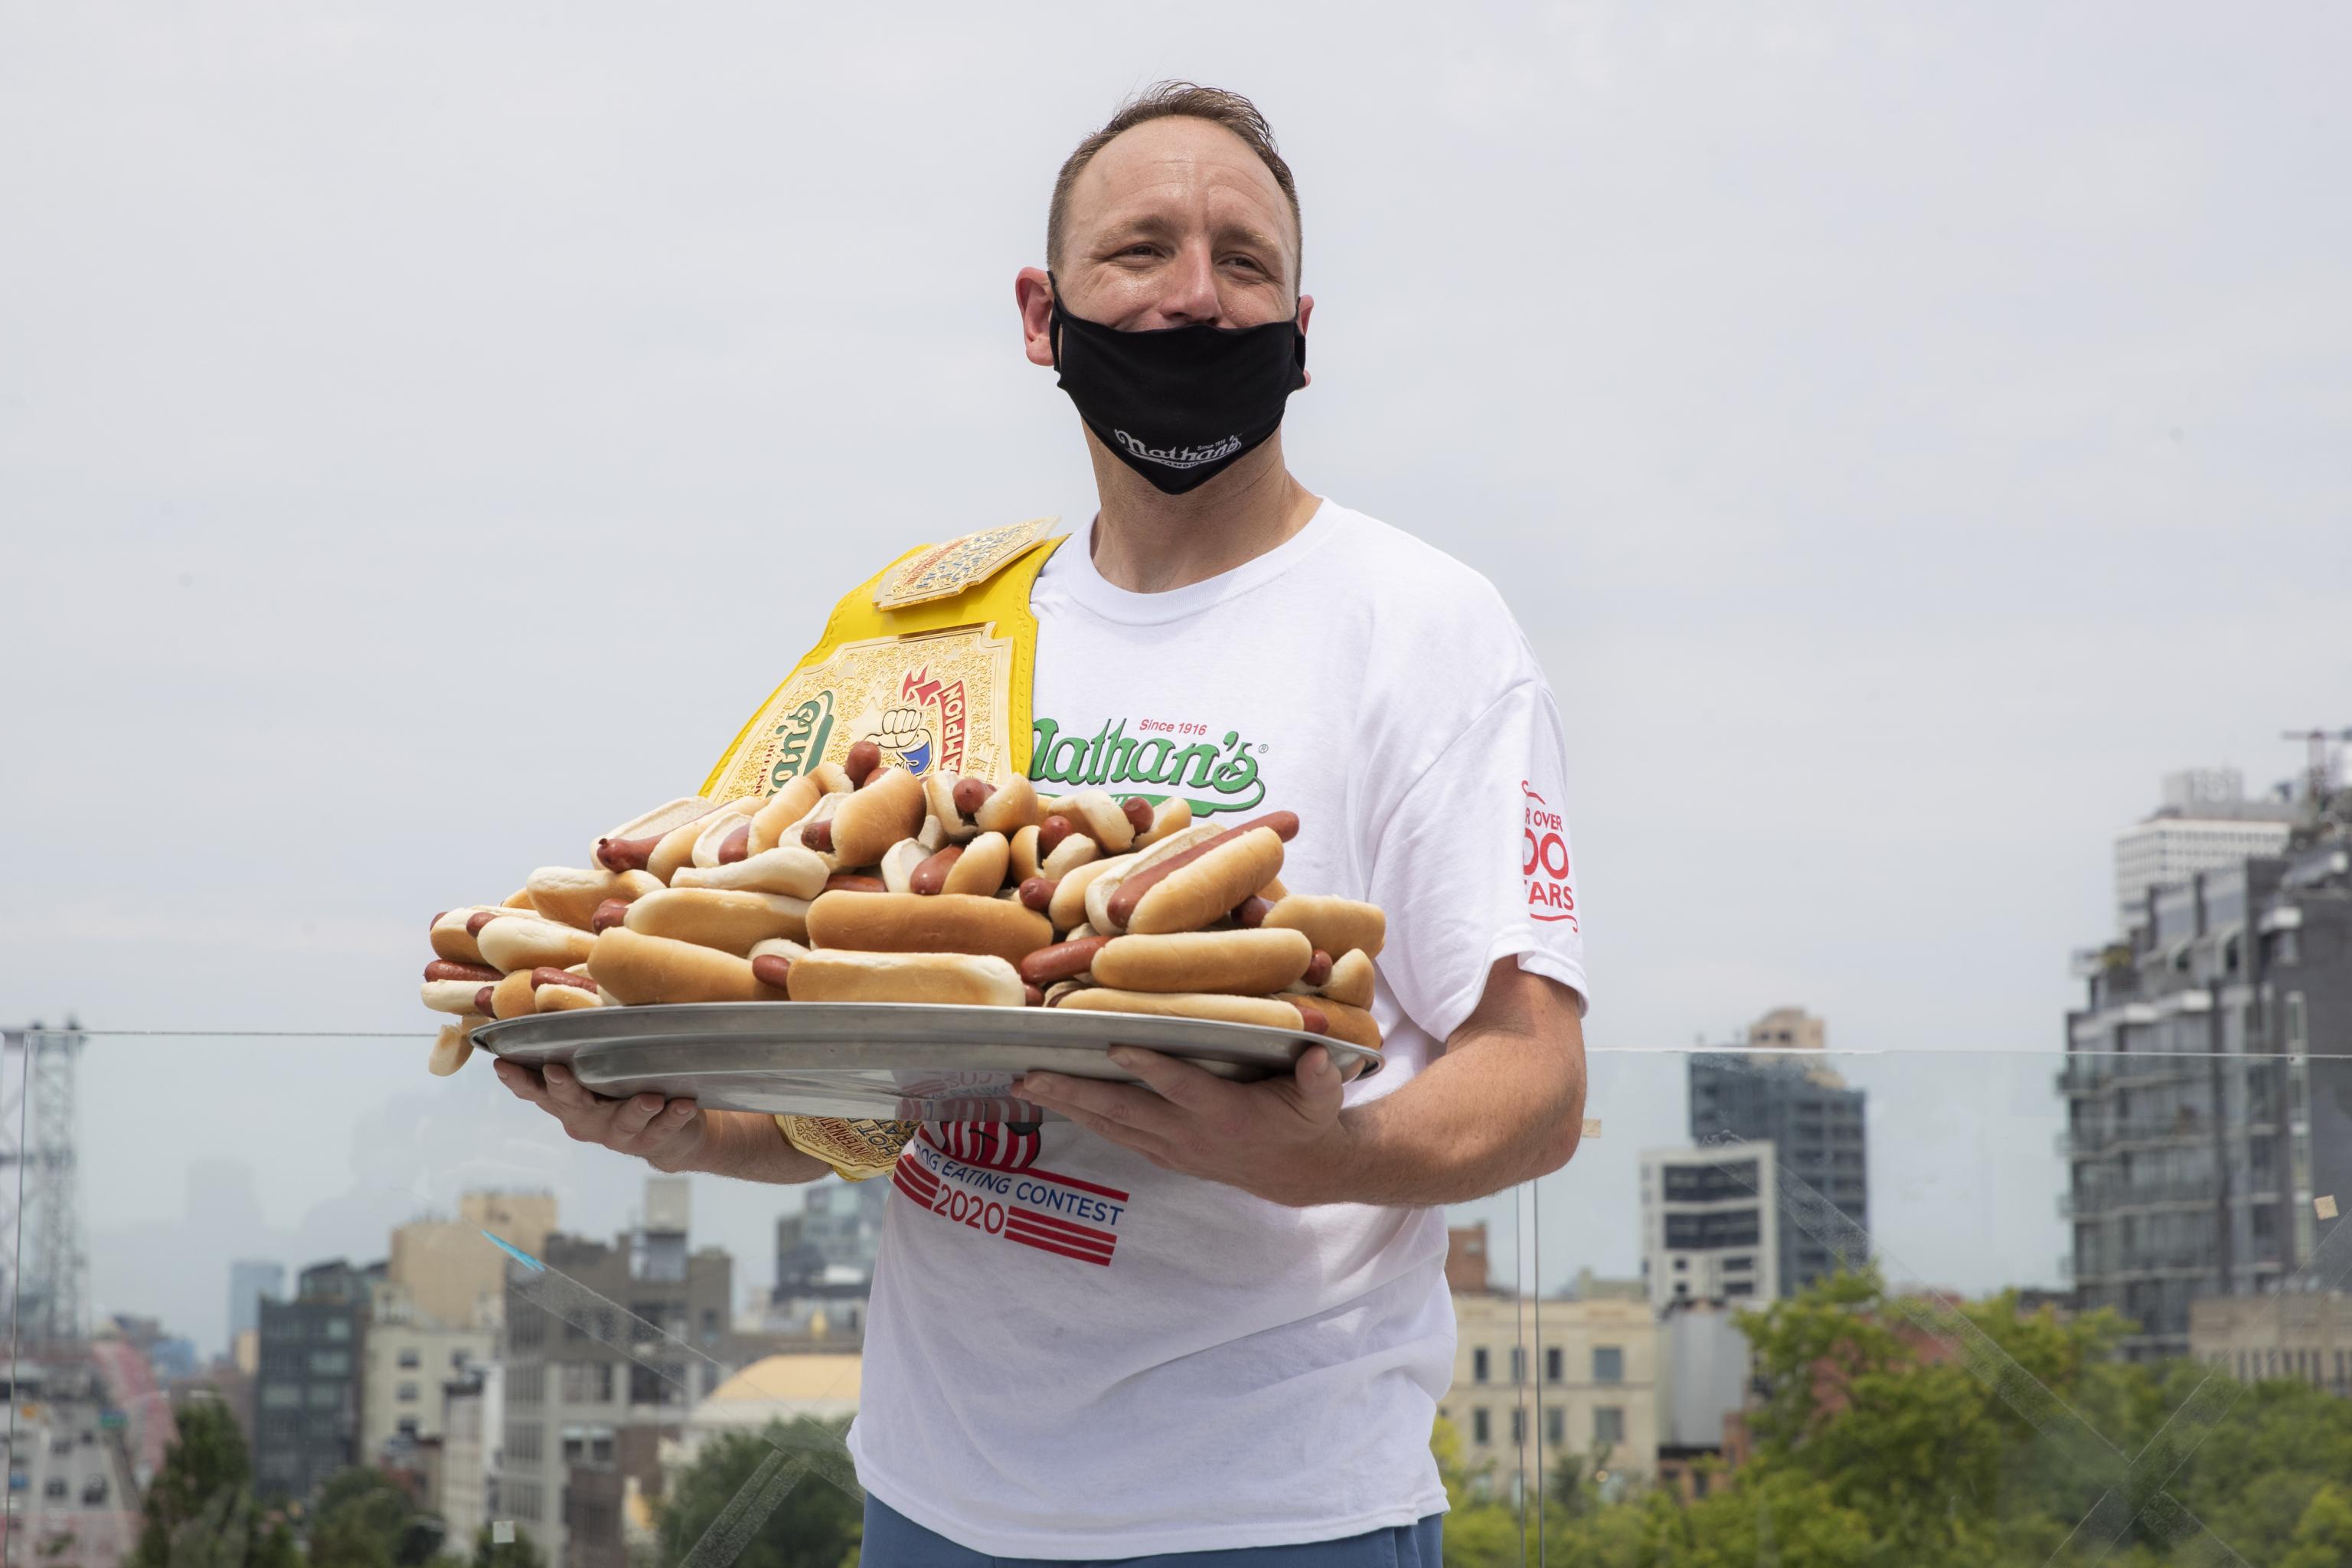 Nathan S Hot Dog Eating Contest 2020 Joey Chestnut Sets Record With 75 Hot Dogs Bleacher Report Latest News Videos And Highlights